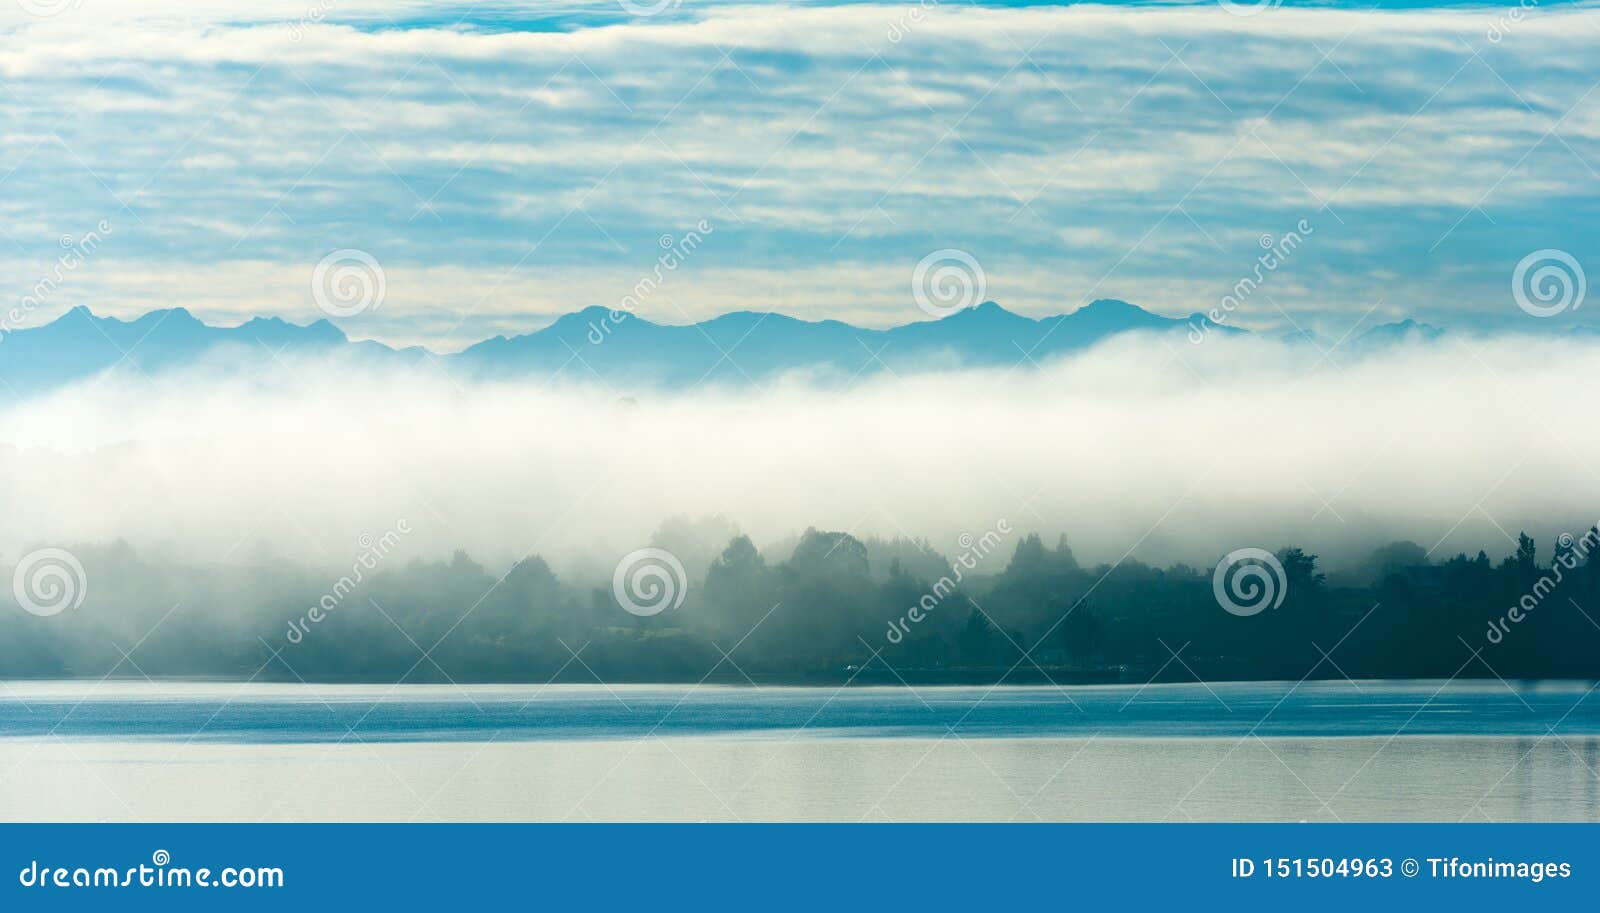 morning fog over puerto varas on the shores of lake llanquihue, chile